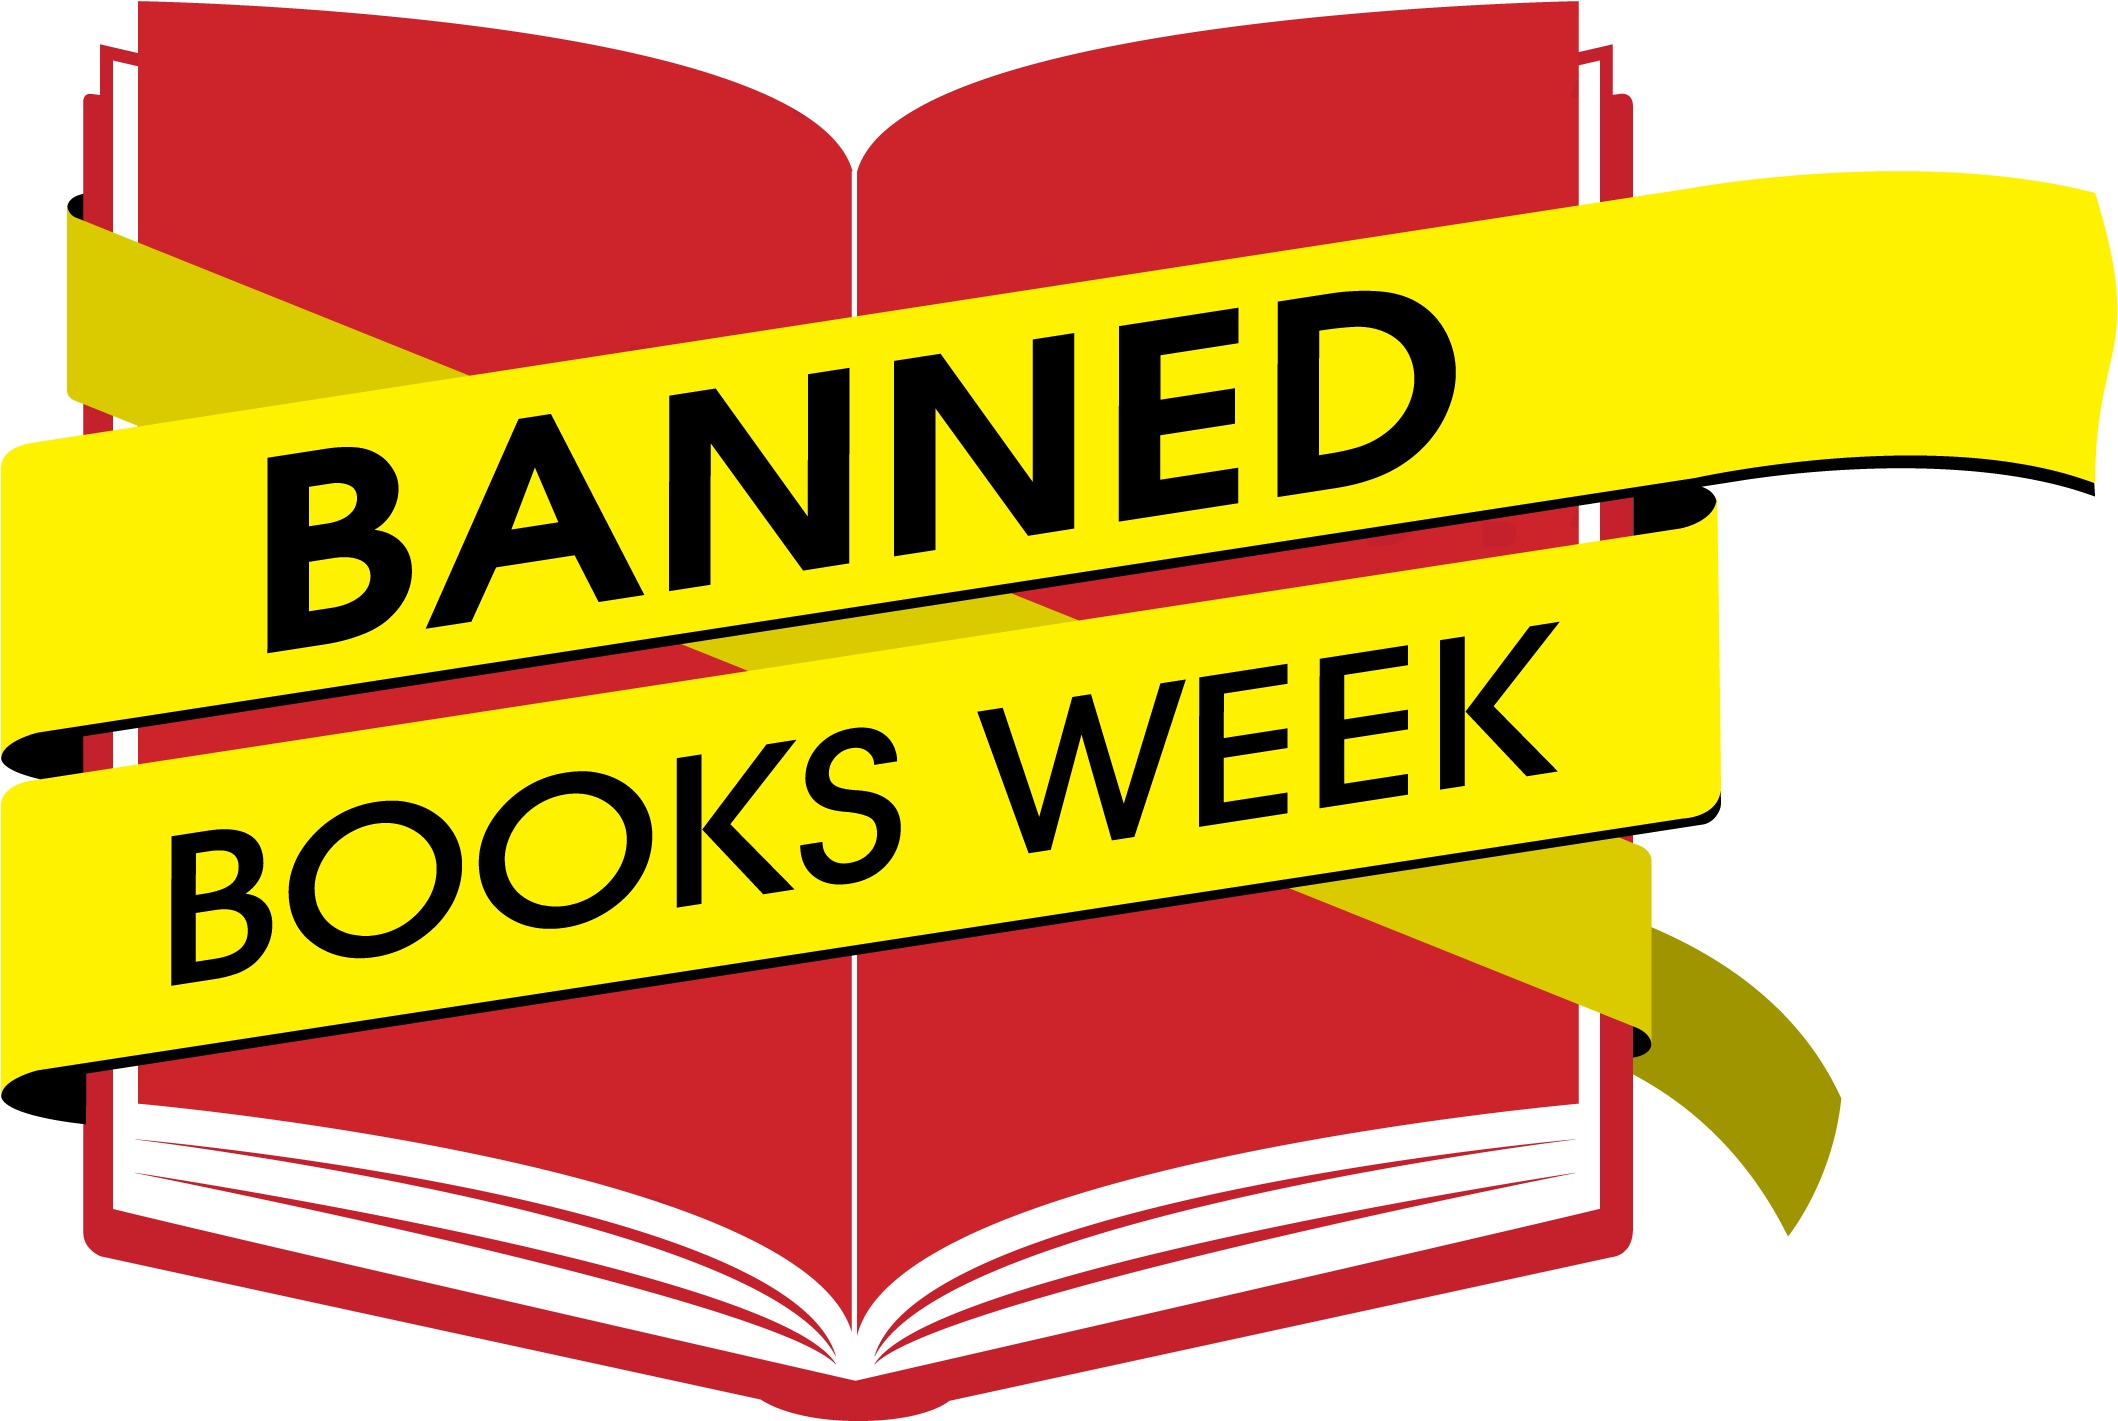 Banned Books Week 2018 Calls Out Censorship - Banned Books Week 2017 (2848x2096)